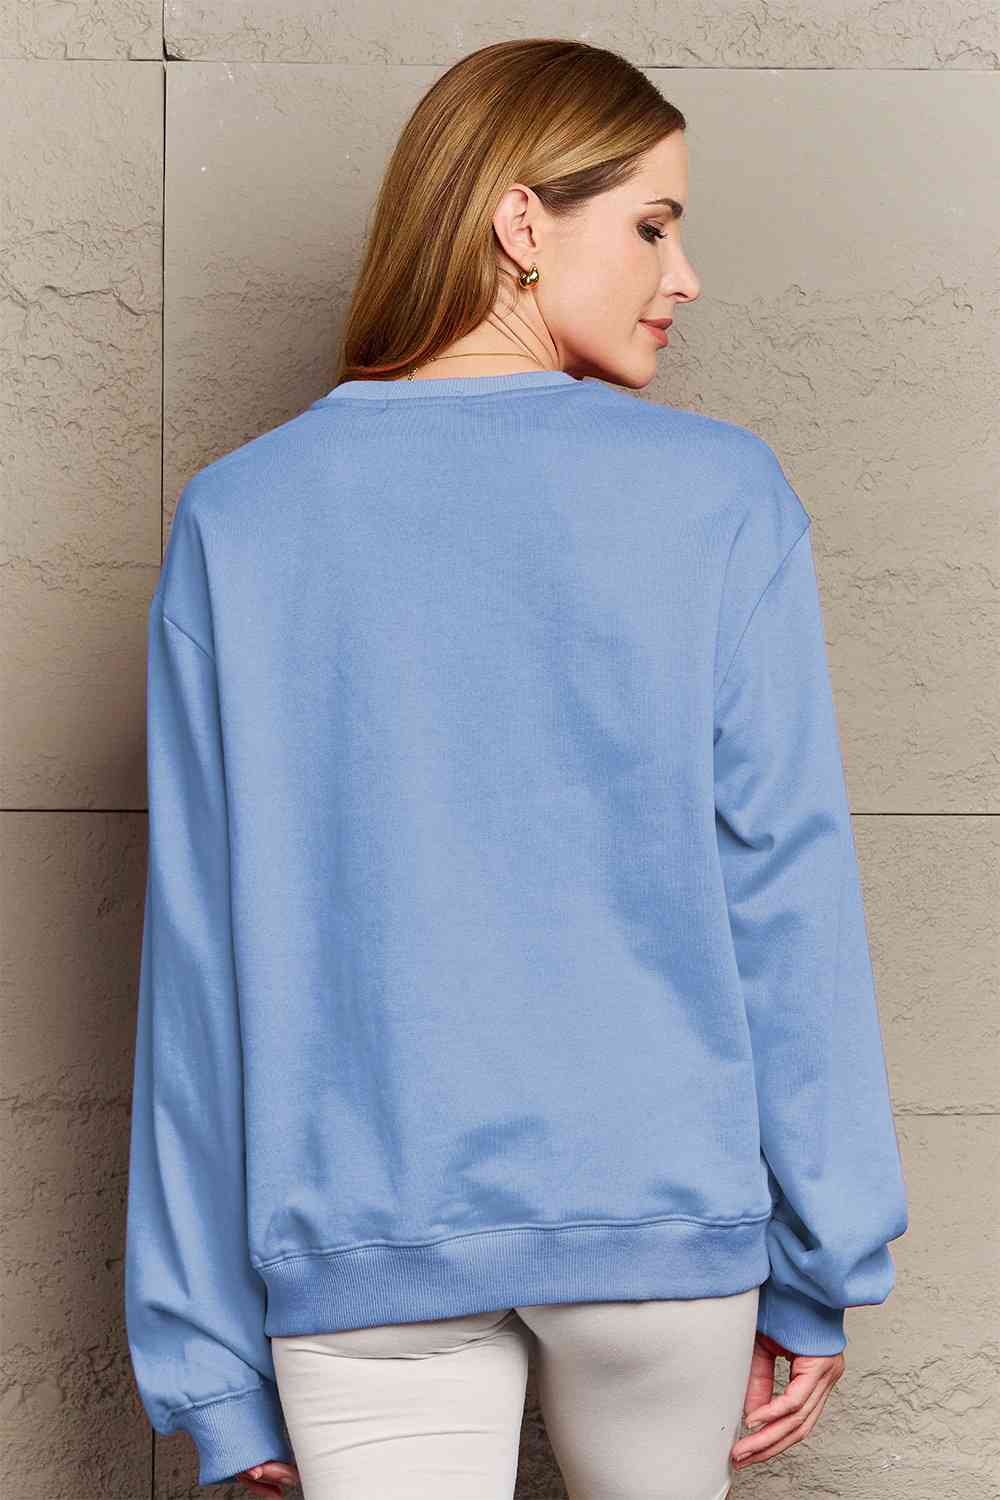 Simply Love Full Size Graphic Round Neck Sweatshirt BLUE ZONE PLANET